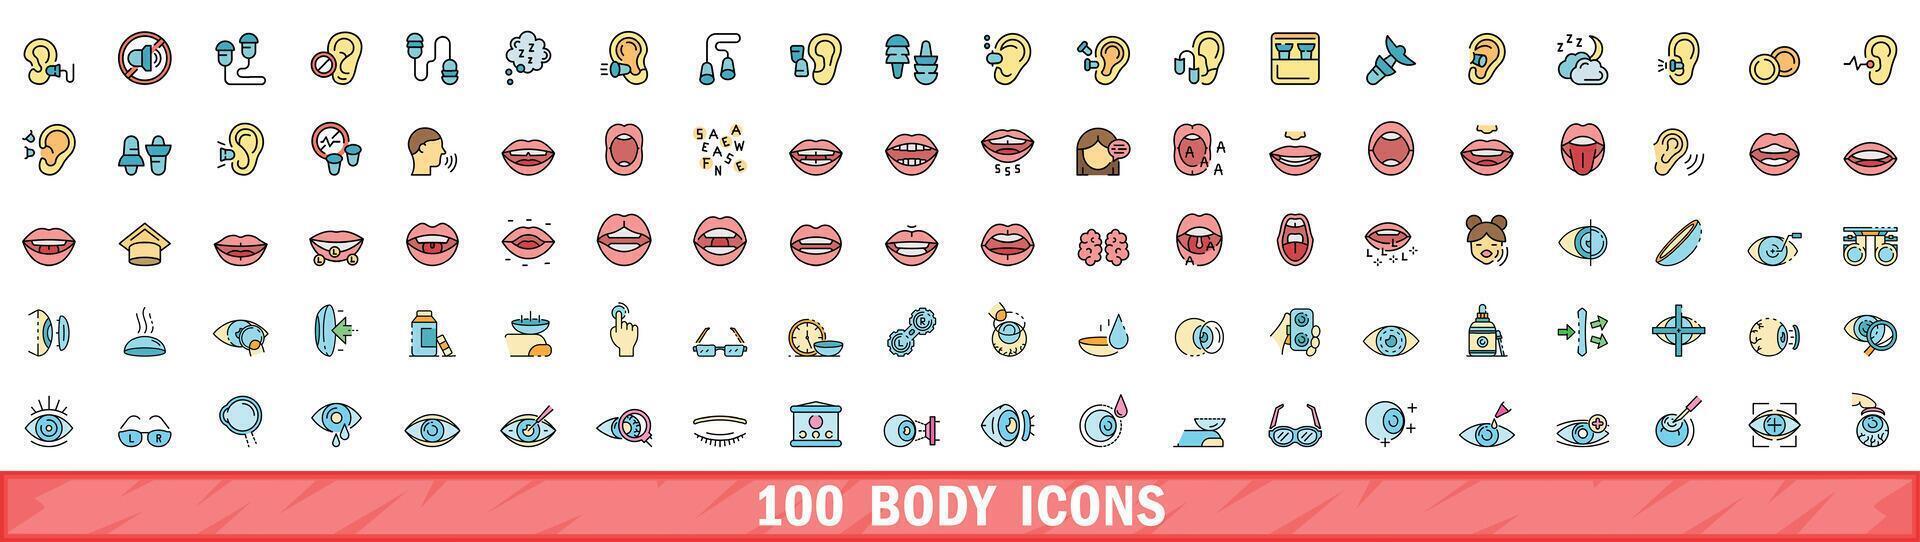 100 body icons set, color line style vector